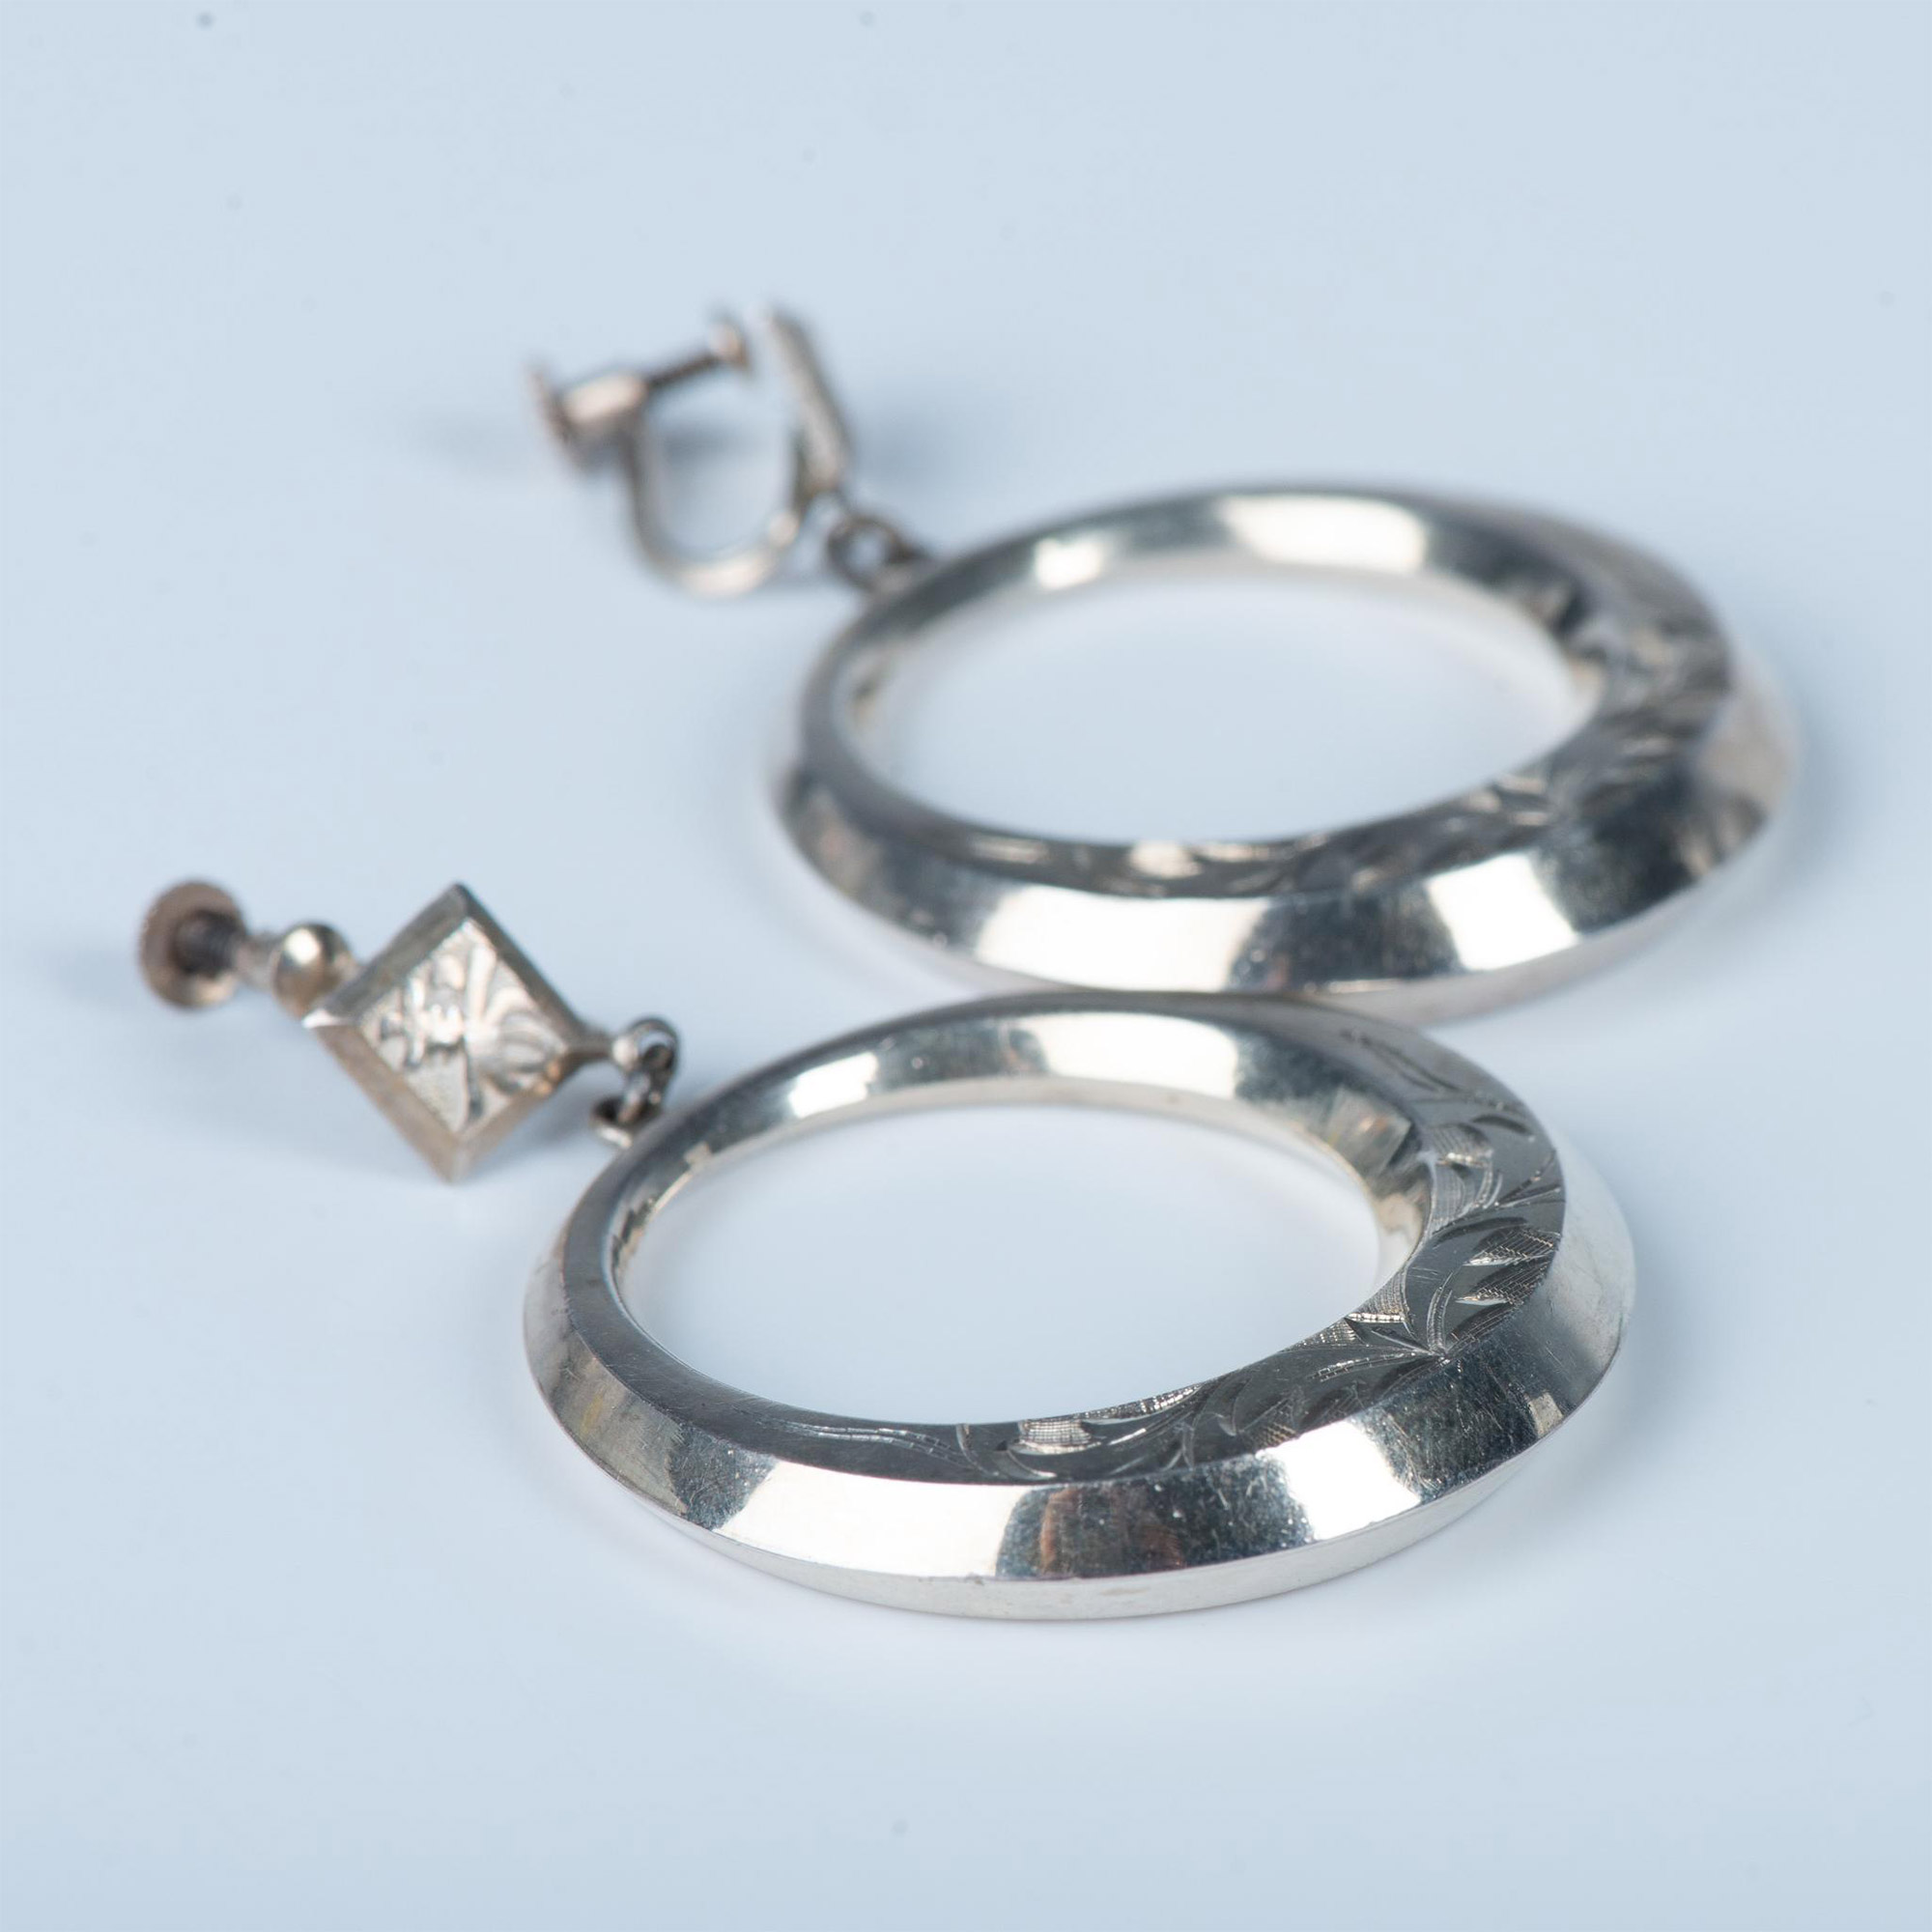 2 Pairs of Sterling Silver Screw Back Earrings - Image 3 of 4